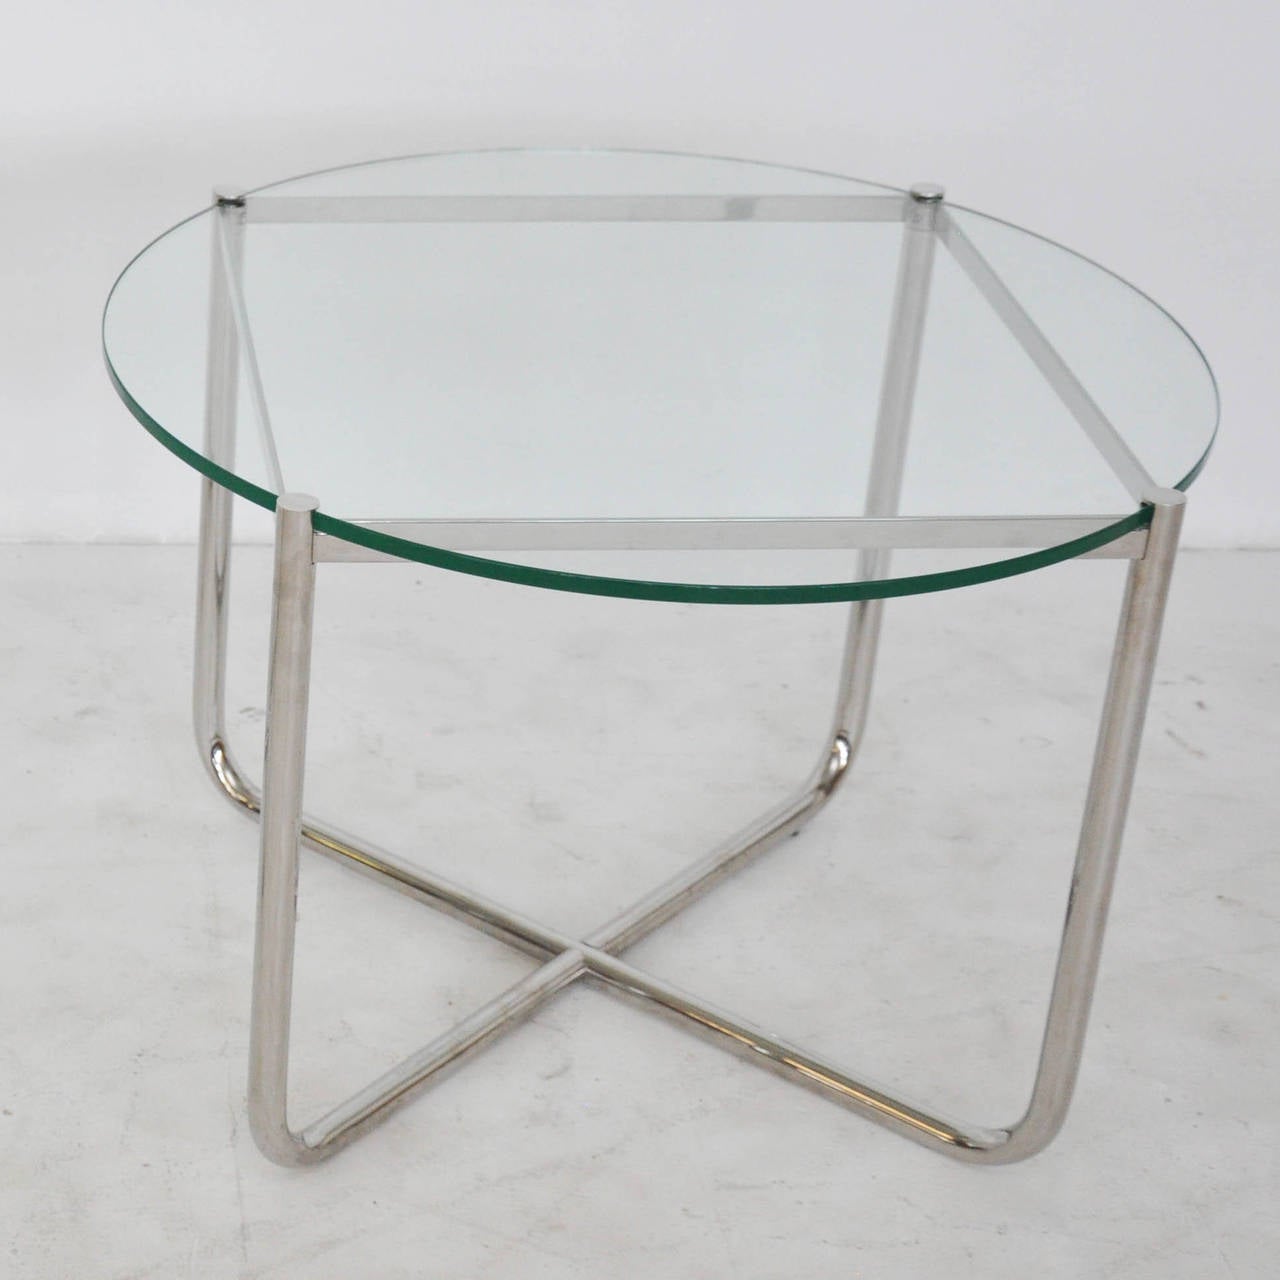 MR table by Ludwig Mies van der Rohe for Knoll. Stainless steel frame with glass top.